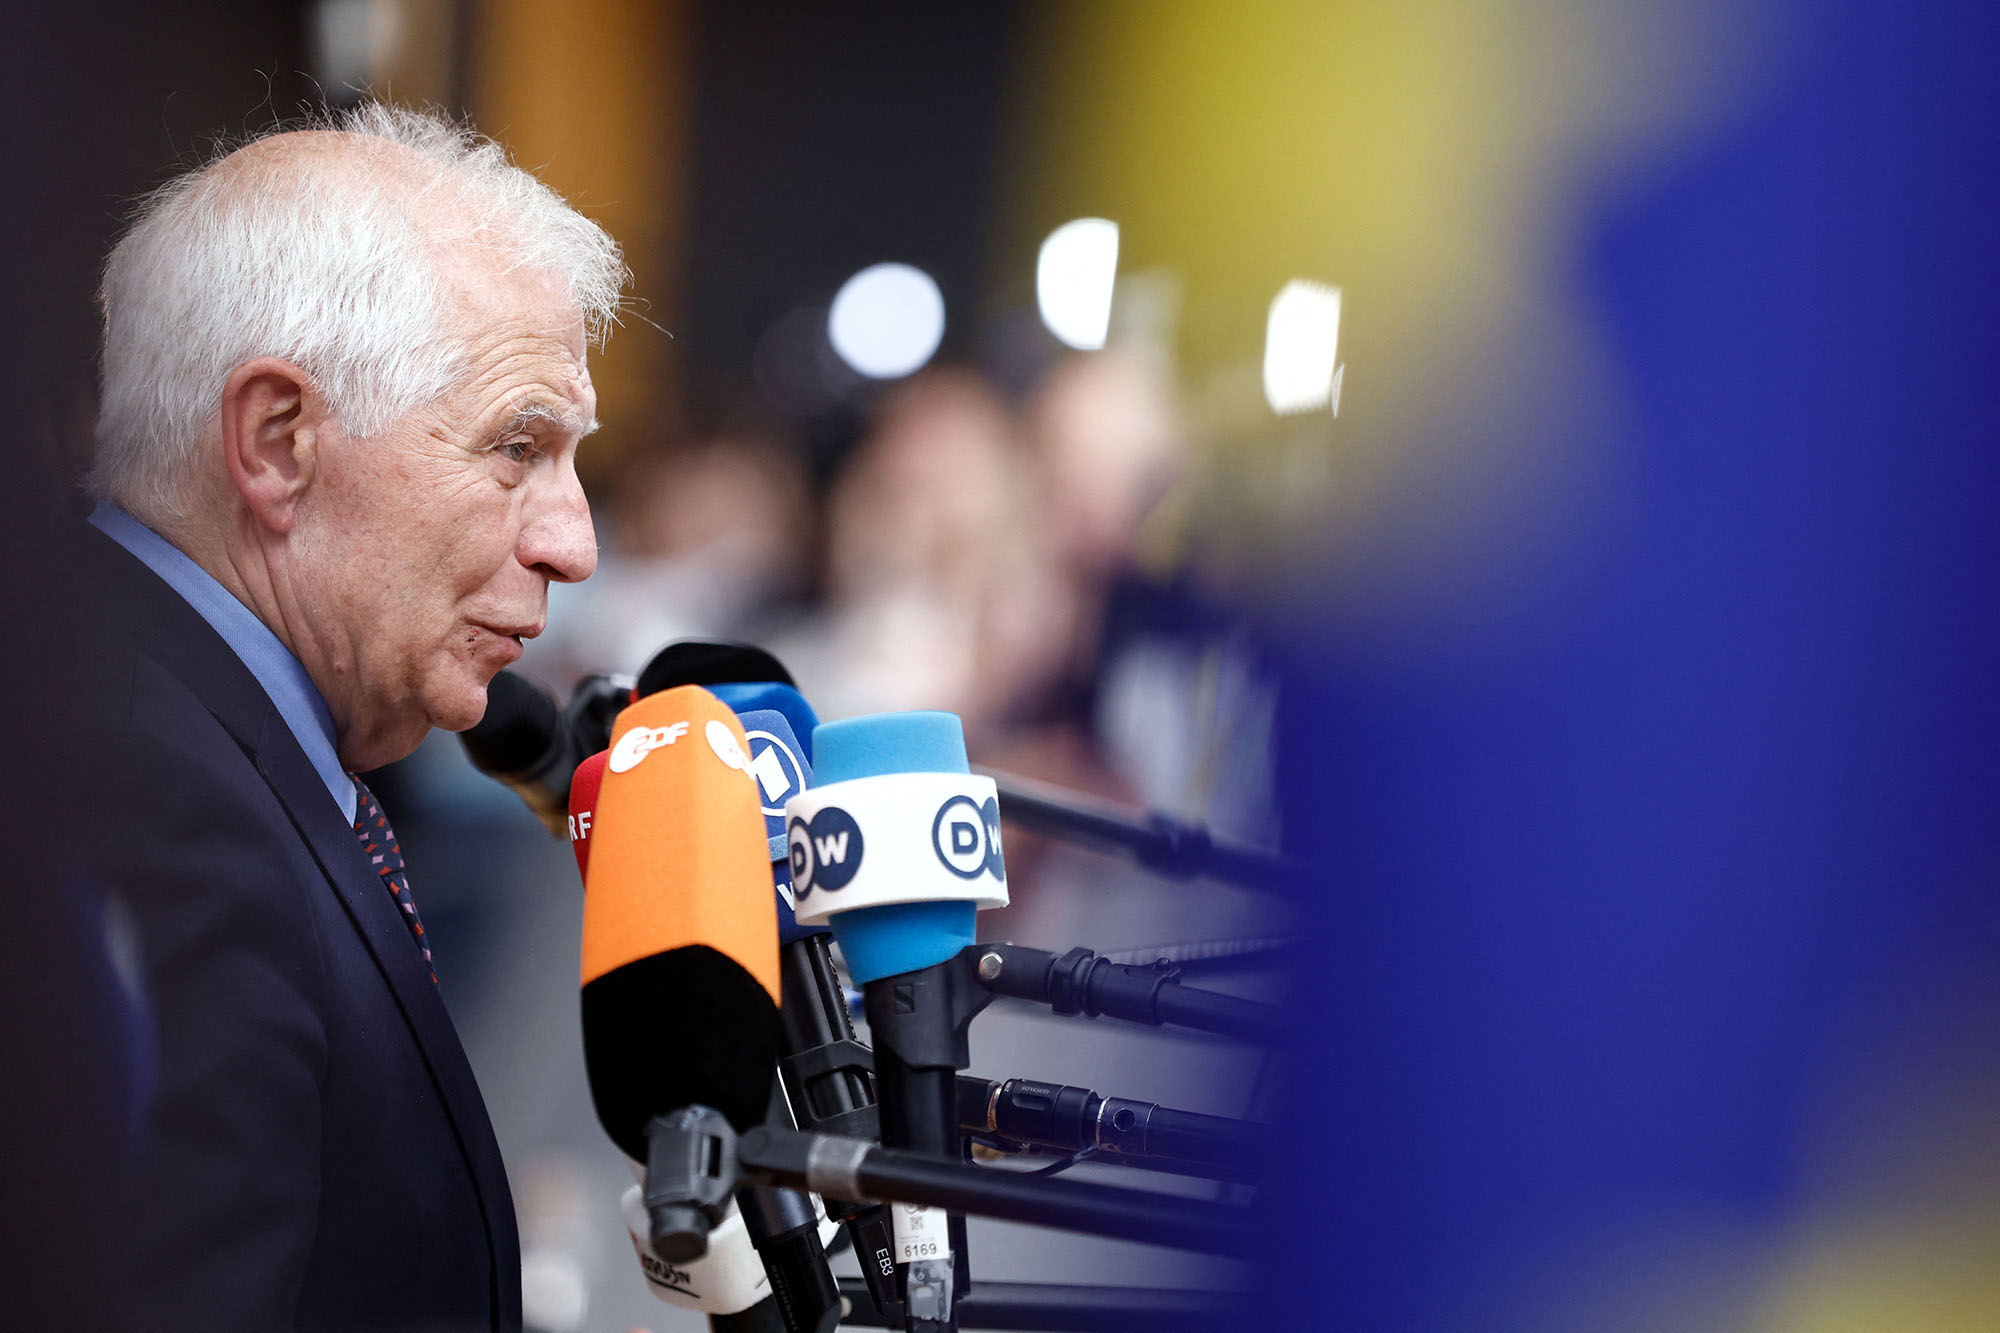 High Representative of the European Union for Foreign Affairs and Security Policy Josep Borrell talks to the media as he arrives for a European Council Summit, at the EU headquarters in Brussels, Belgium, on June 29.